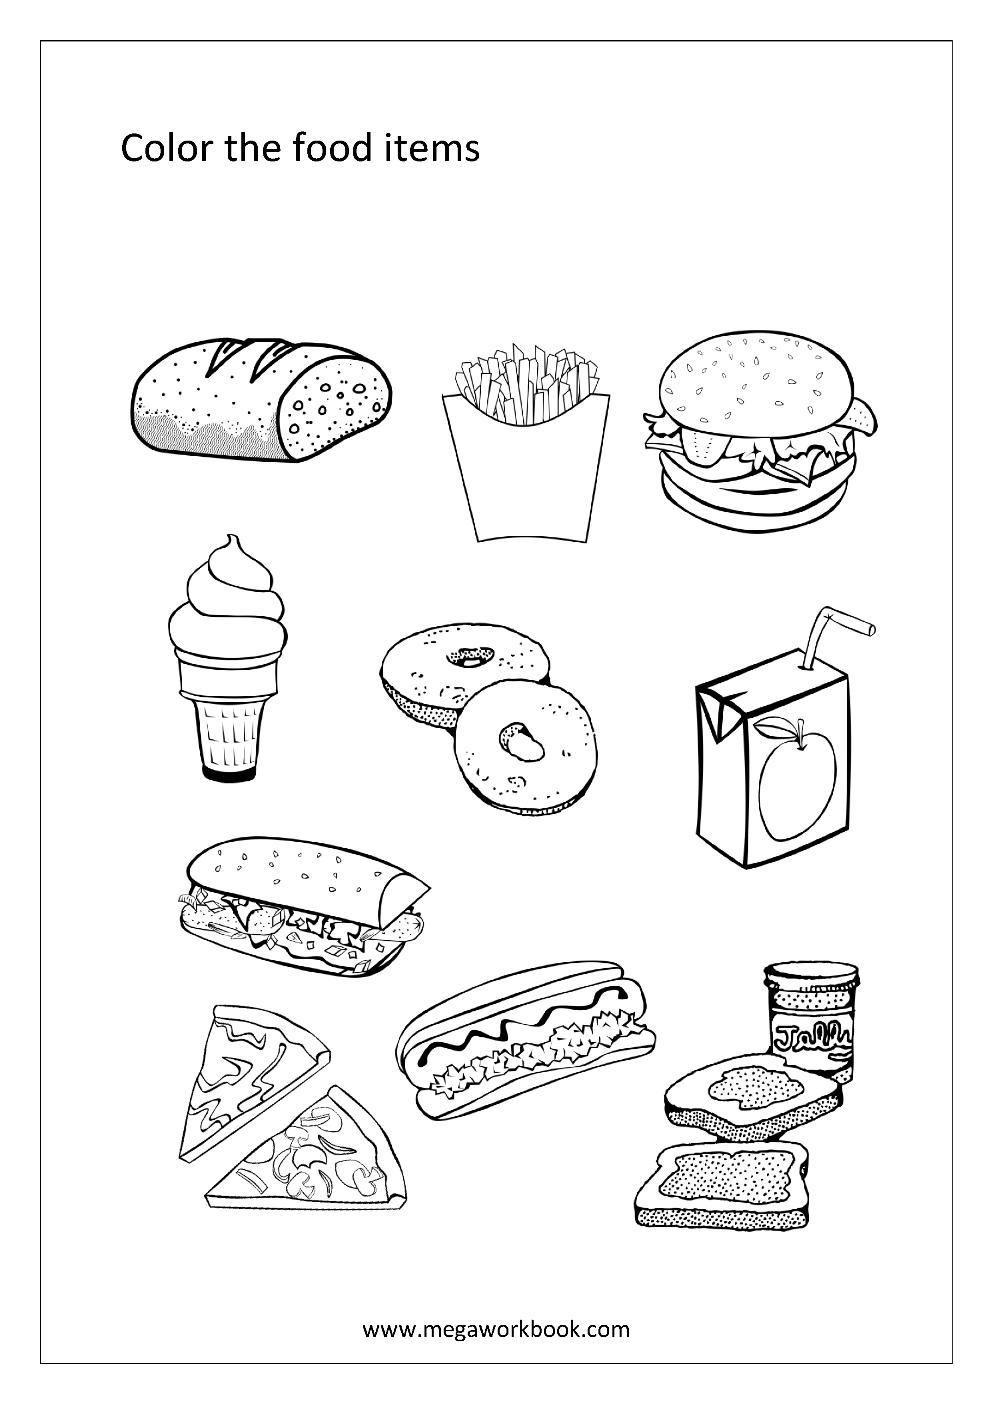 Free Coloring Sheets - Miscellaneous - MegaWorkbook